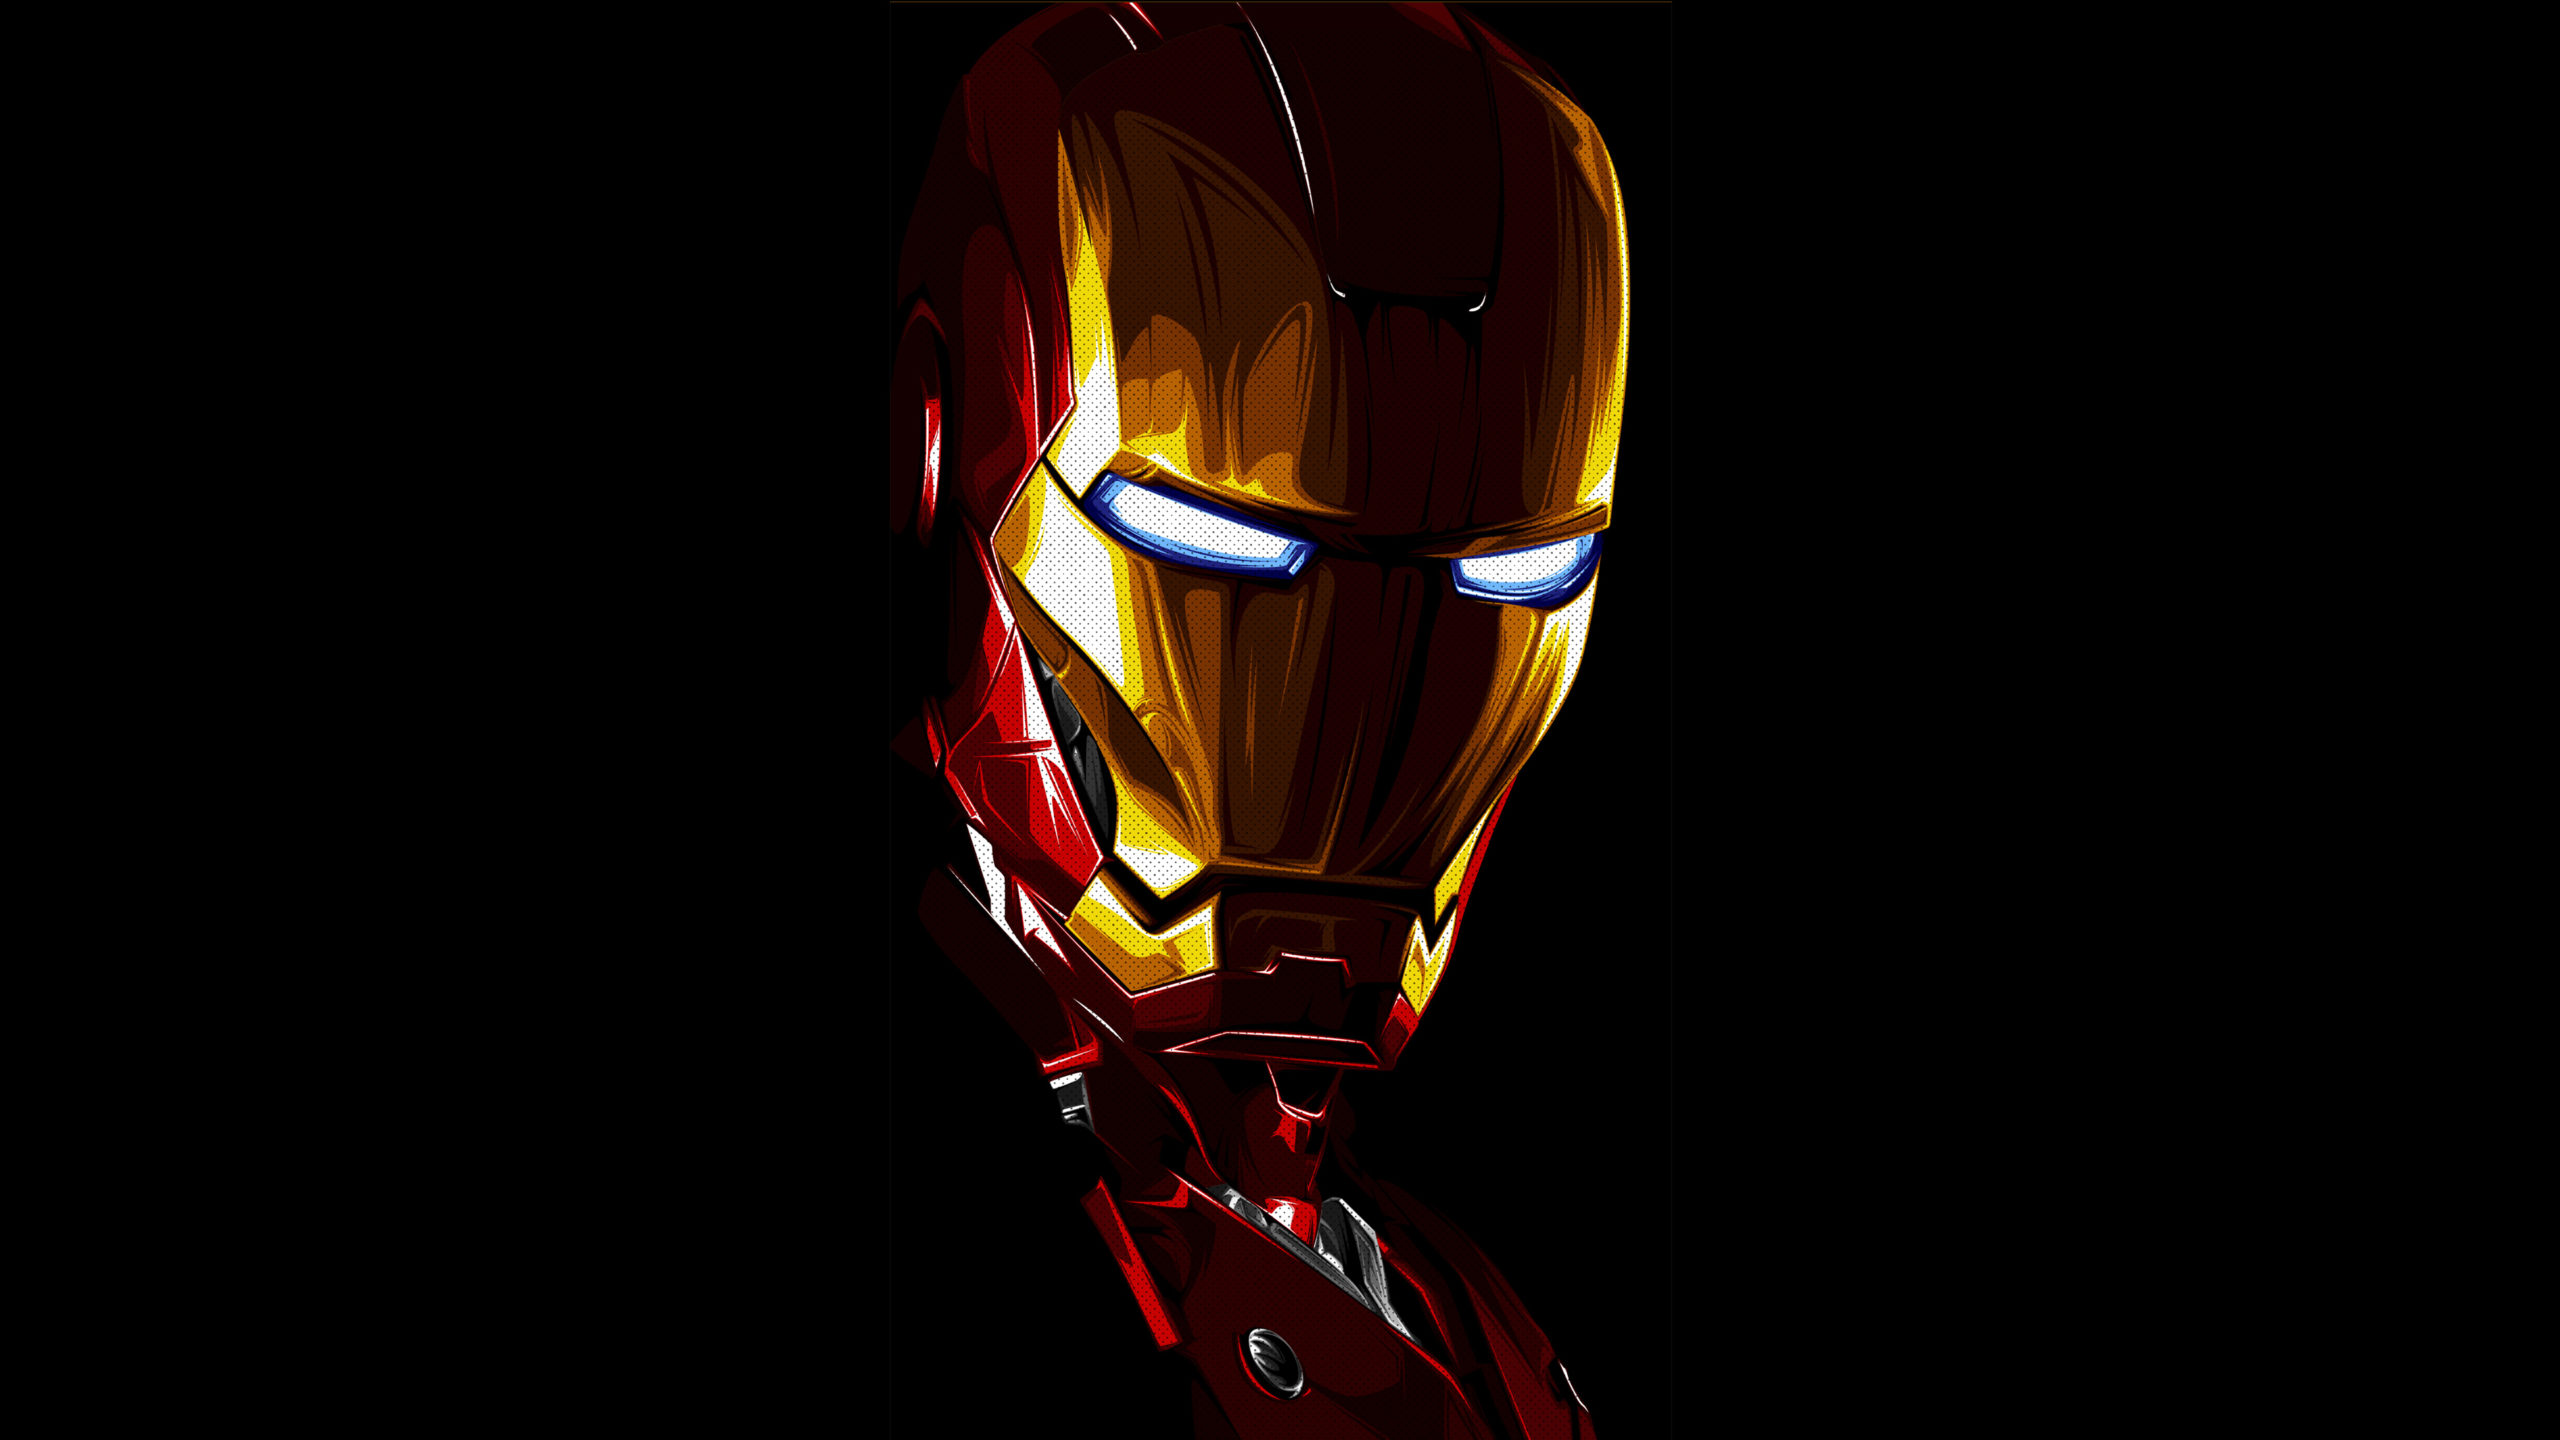 Top iron man 4k wallpaper for pc free Download Book Source for free download HD, 4K & high quality wallpaper